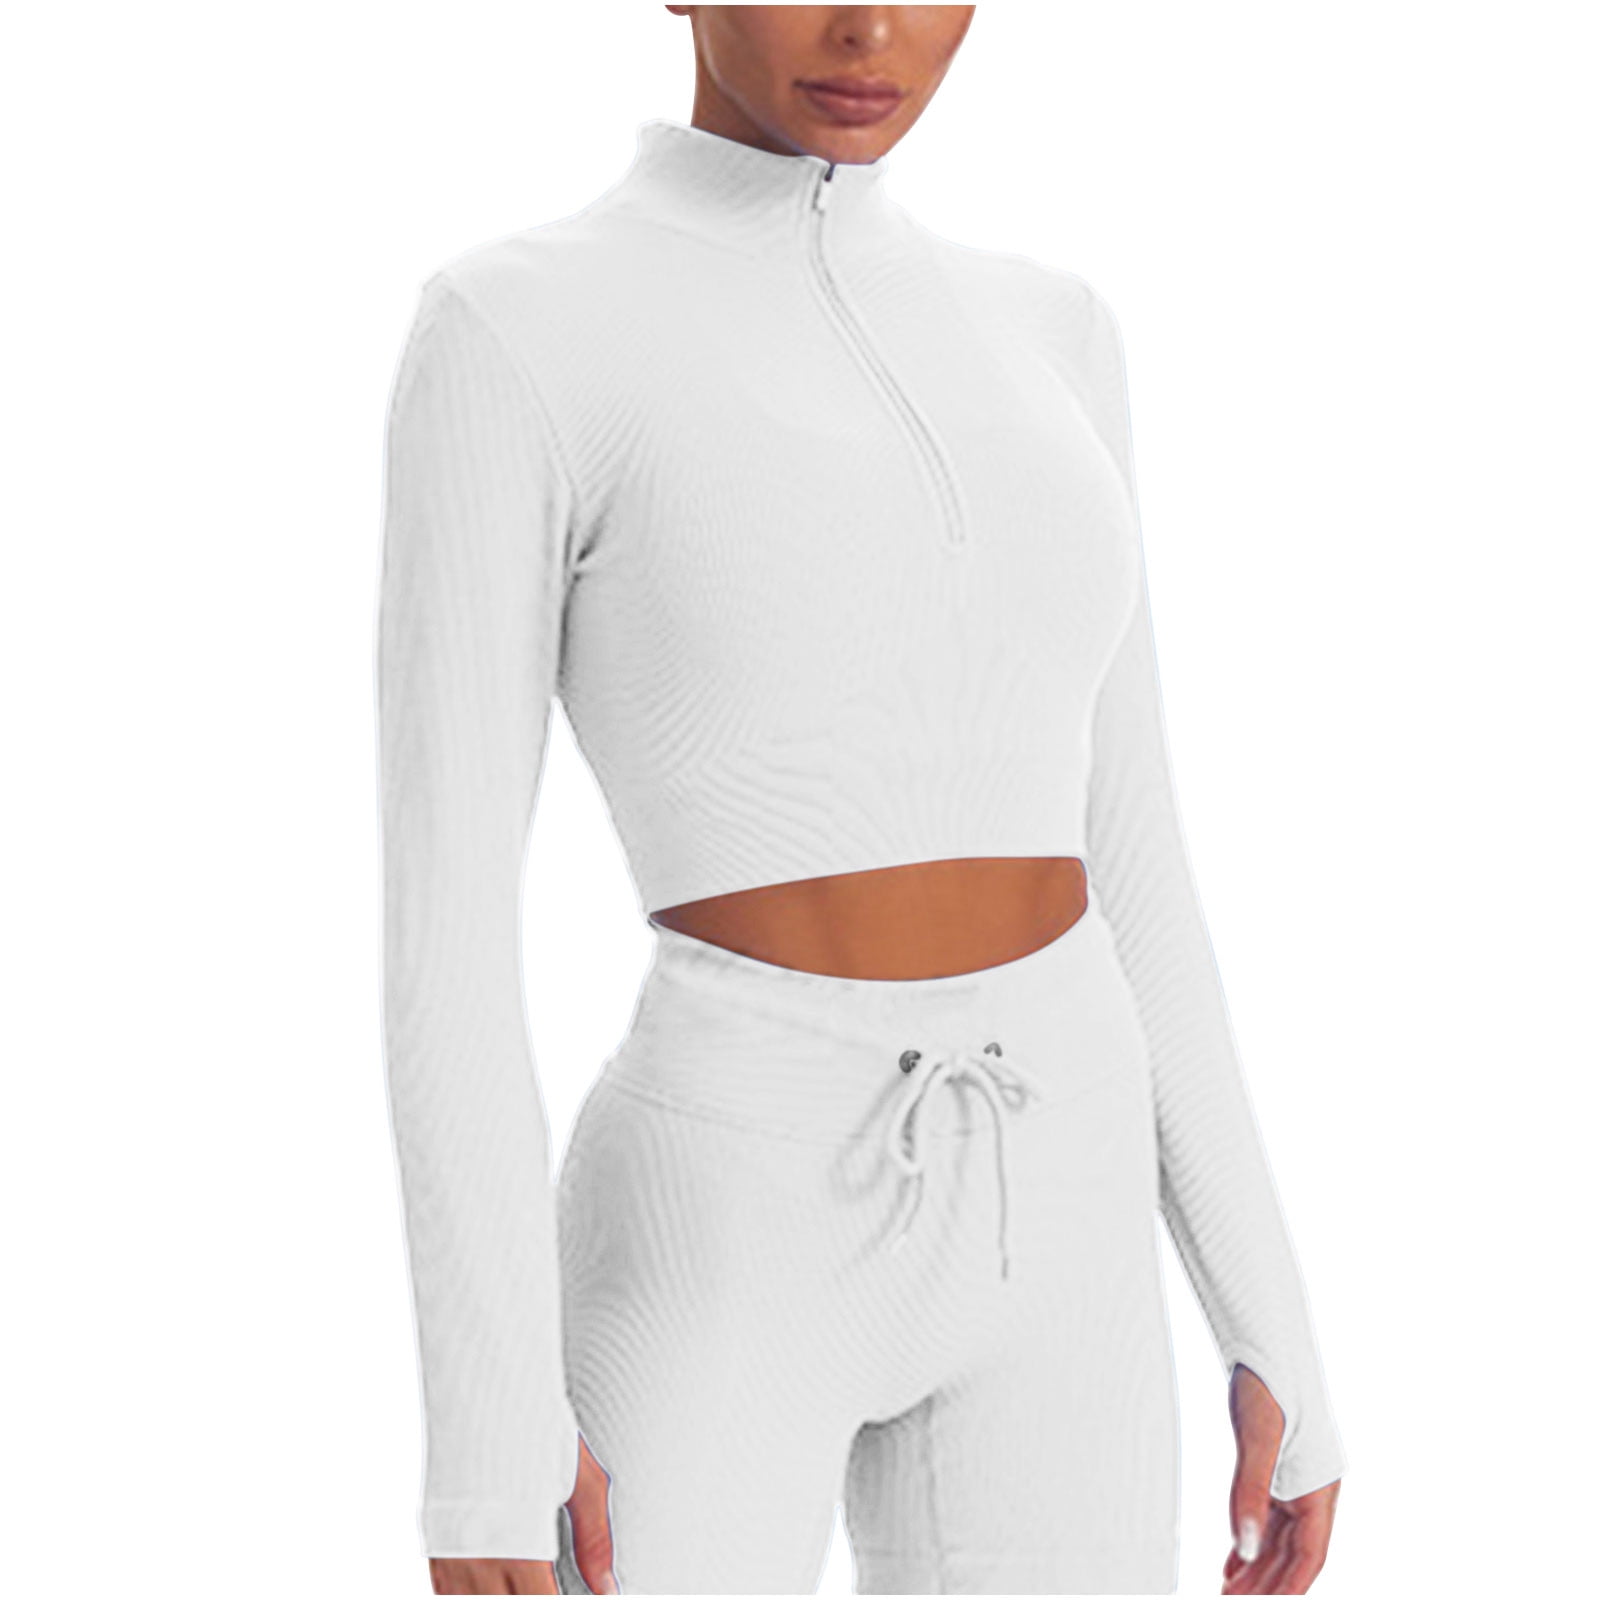 XFLWAM Women's Long Sleeve Crop Top Quick Dry Cropped Workout